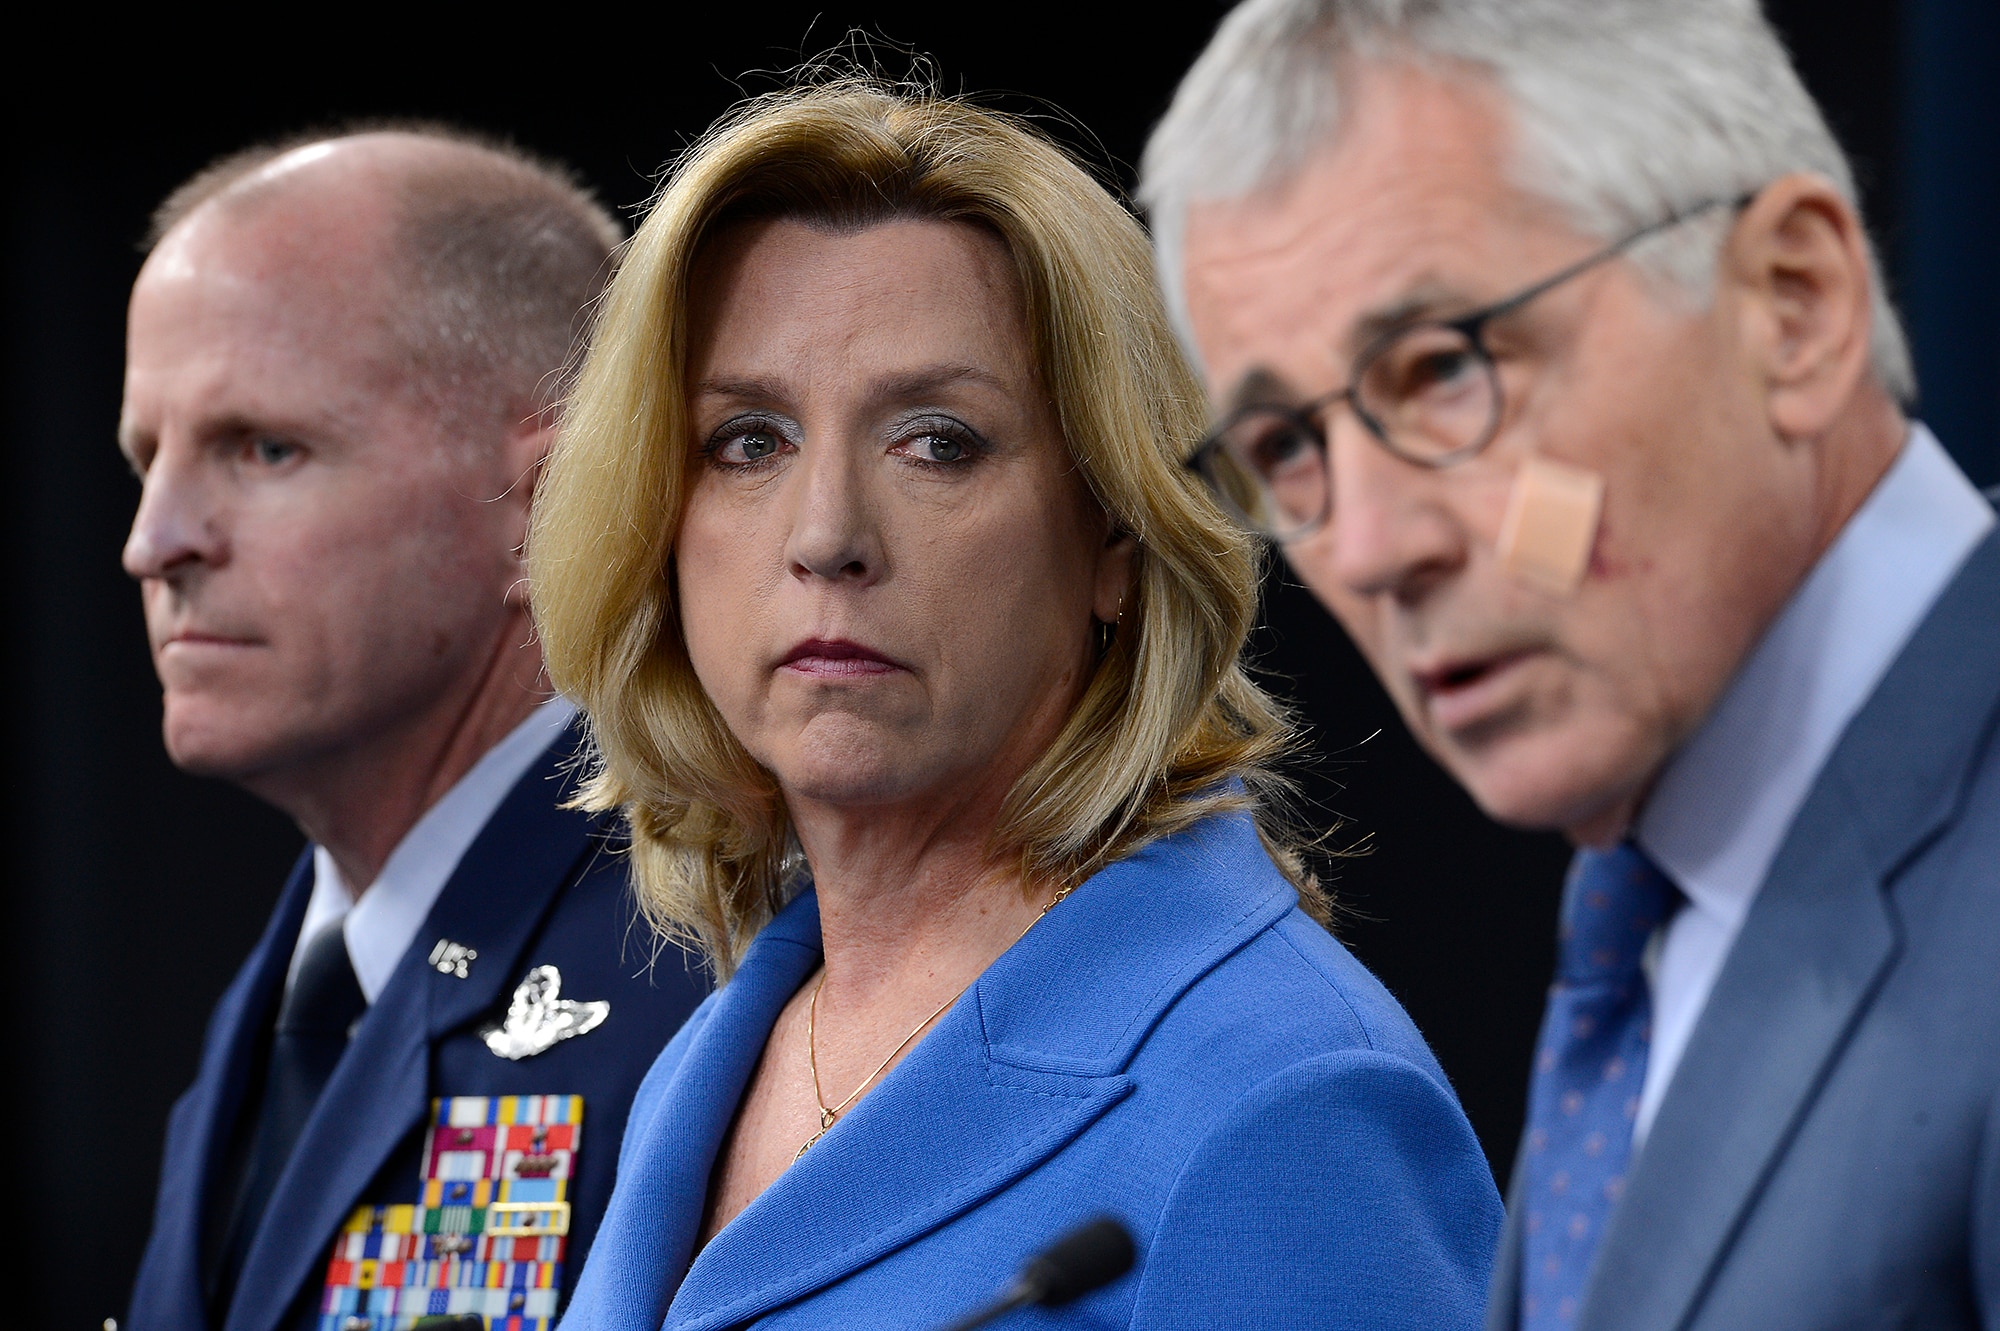 Commander of Air Force Global Strike Command Lt. Gen. Stephen Wilson and Secretary of the Air Force Deborah Lee James join Secretary of Defense Chuck Hagel in the release of the results of the Defense Department's Nuclear Enterprise Review during a press briefing Nov. 14, 2014, at the Pentagon.  The findings and recommendations from that review are consistent with actions the Air Force and AFGSC have been taking to improve its nuclear enterprise. (U.S. Air Force photo/Scott M. Ash)